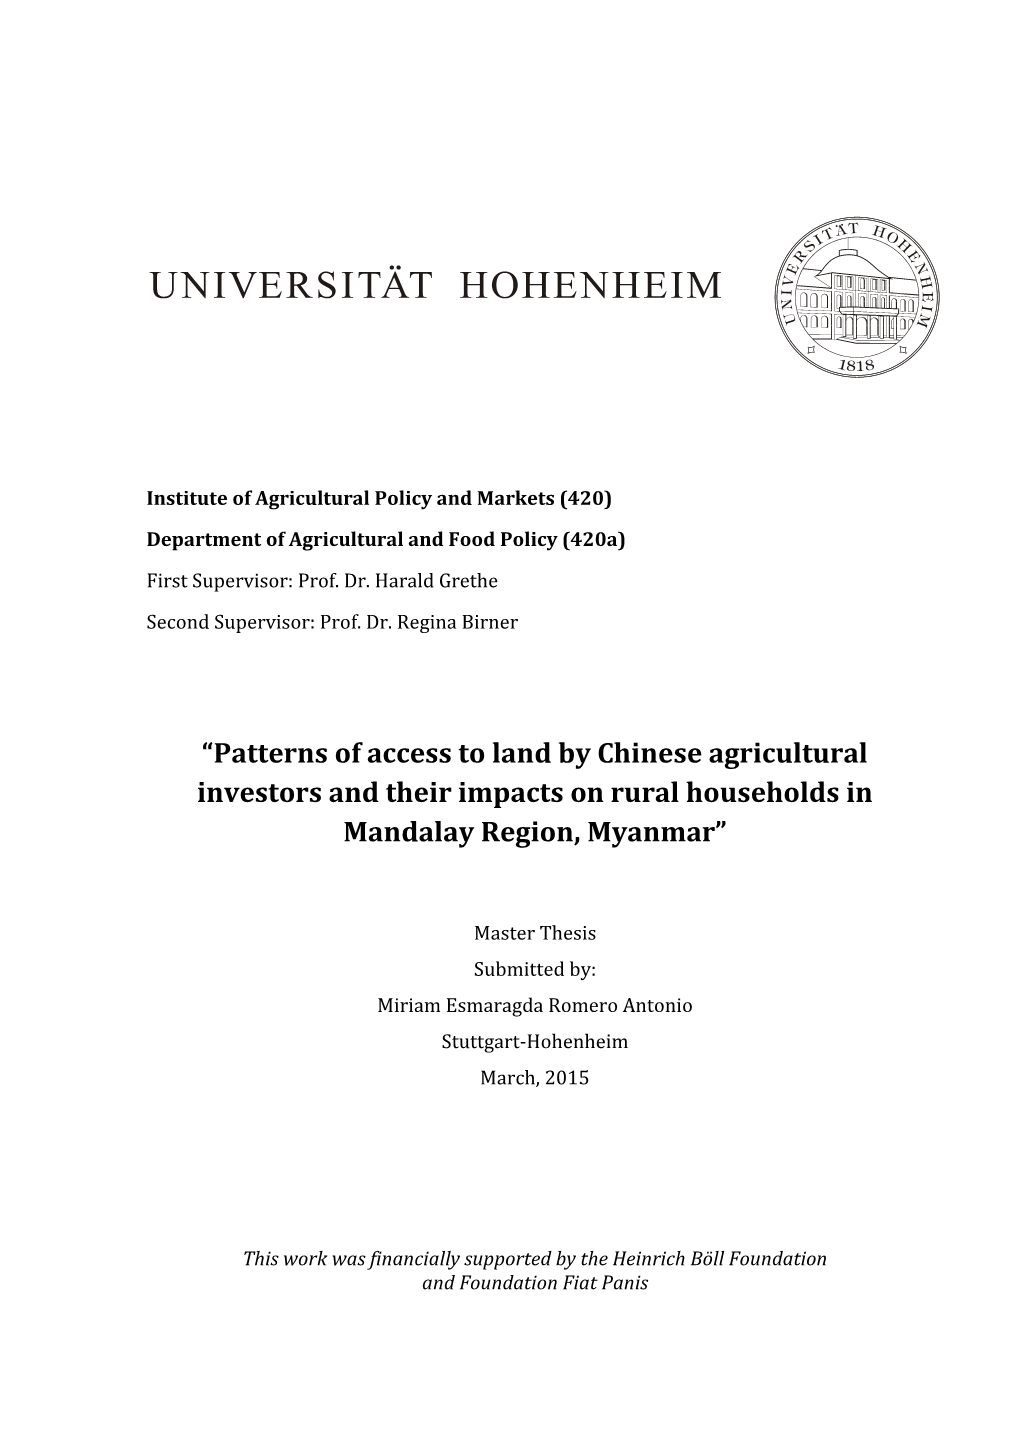 “Patterns of Access to Land by Chinese Agricultural Investors and Their Impacts on Rural Households in Mandalay Region, Myanmar”